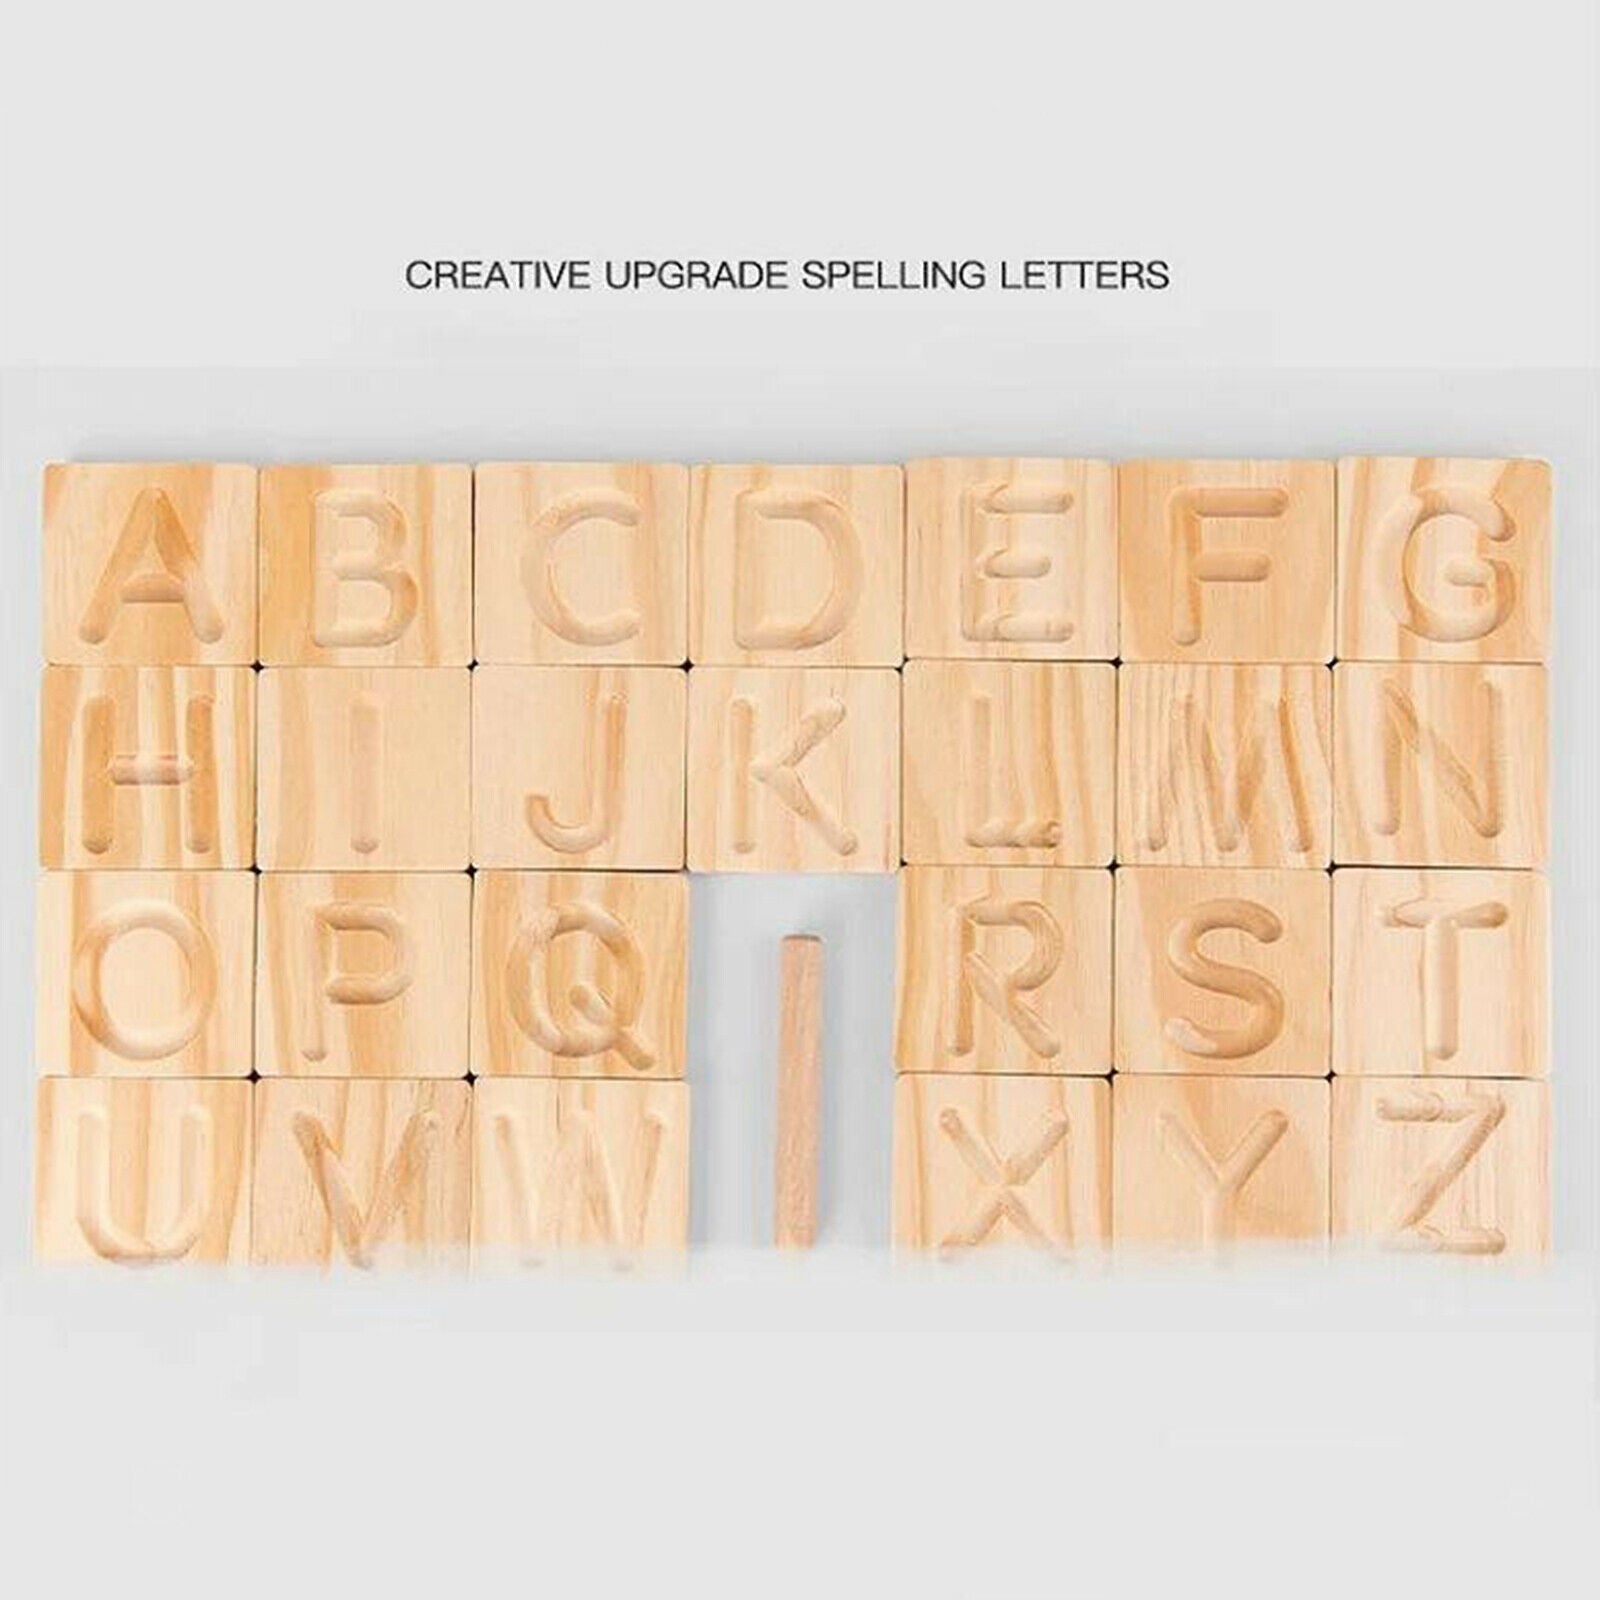 Preschool Learning Letter Tracing Alphabet Cards, Solid Wood with Stylus Pen